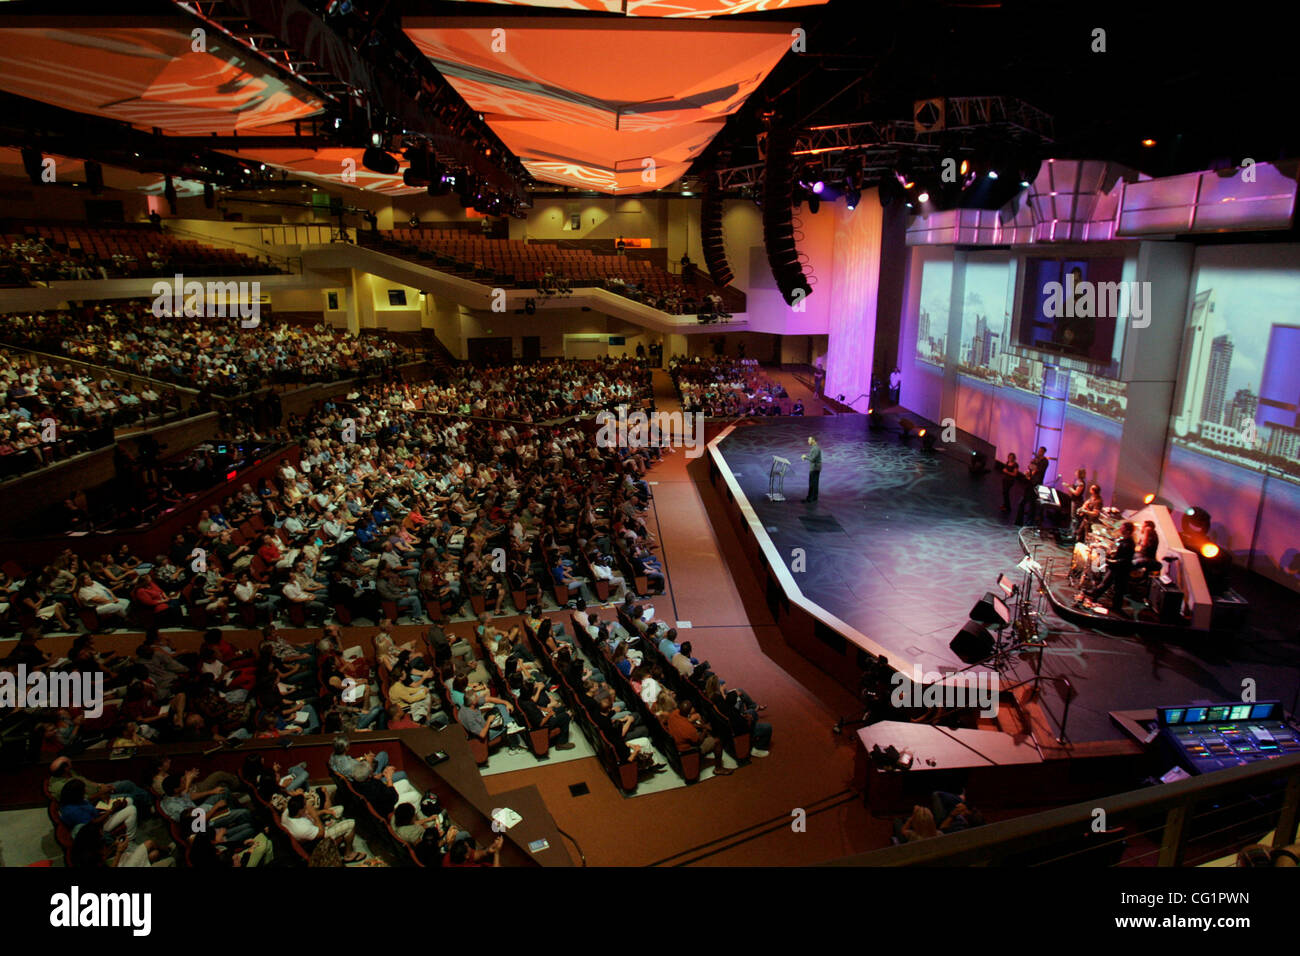 August 26, 2007, San Diego, California, USA The Rock Church finally had its  first service in its grandiose new building Sunday in Point Loma. Parking  was expected to be a problem, but